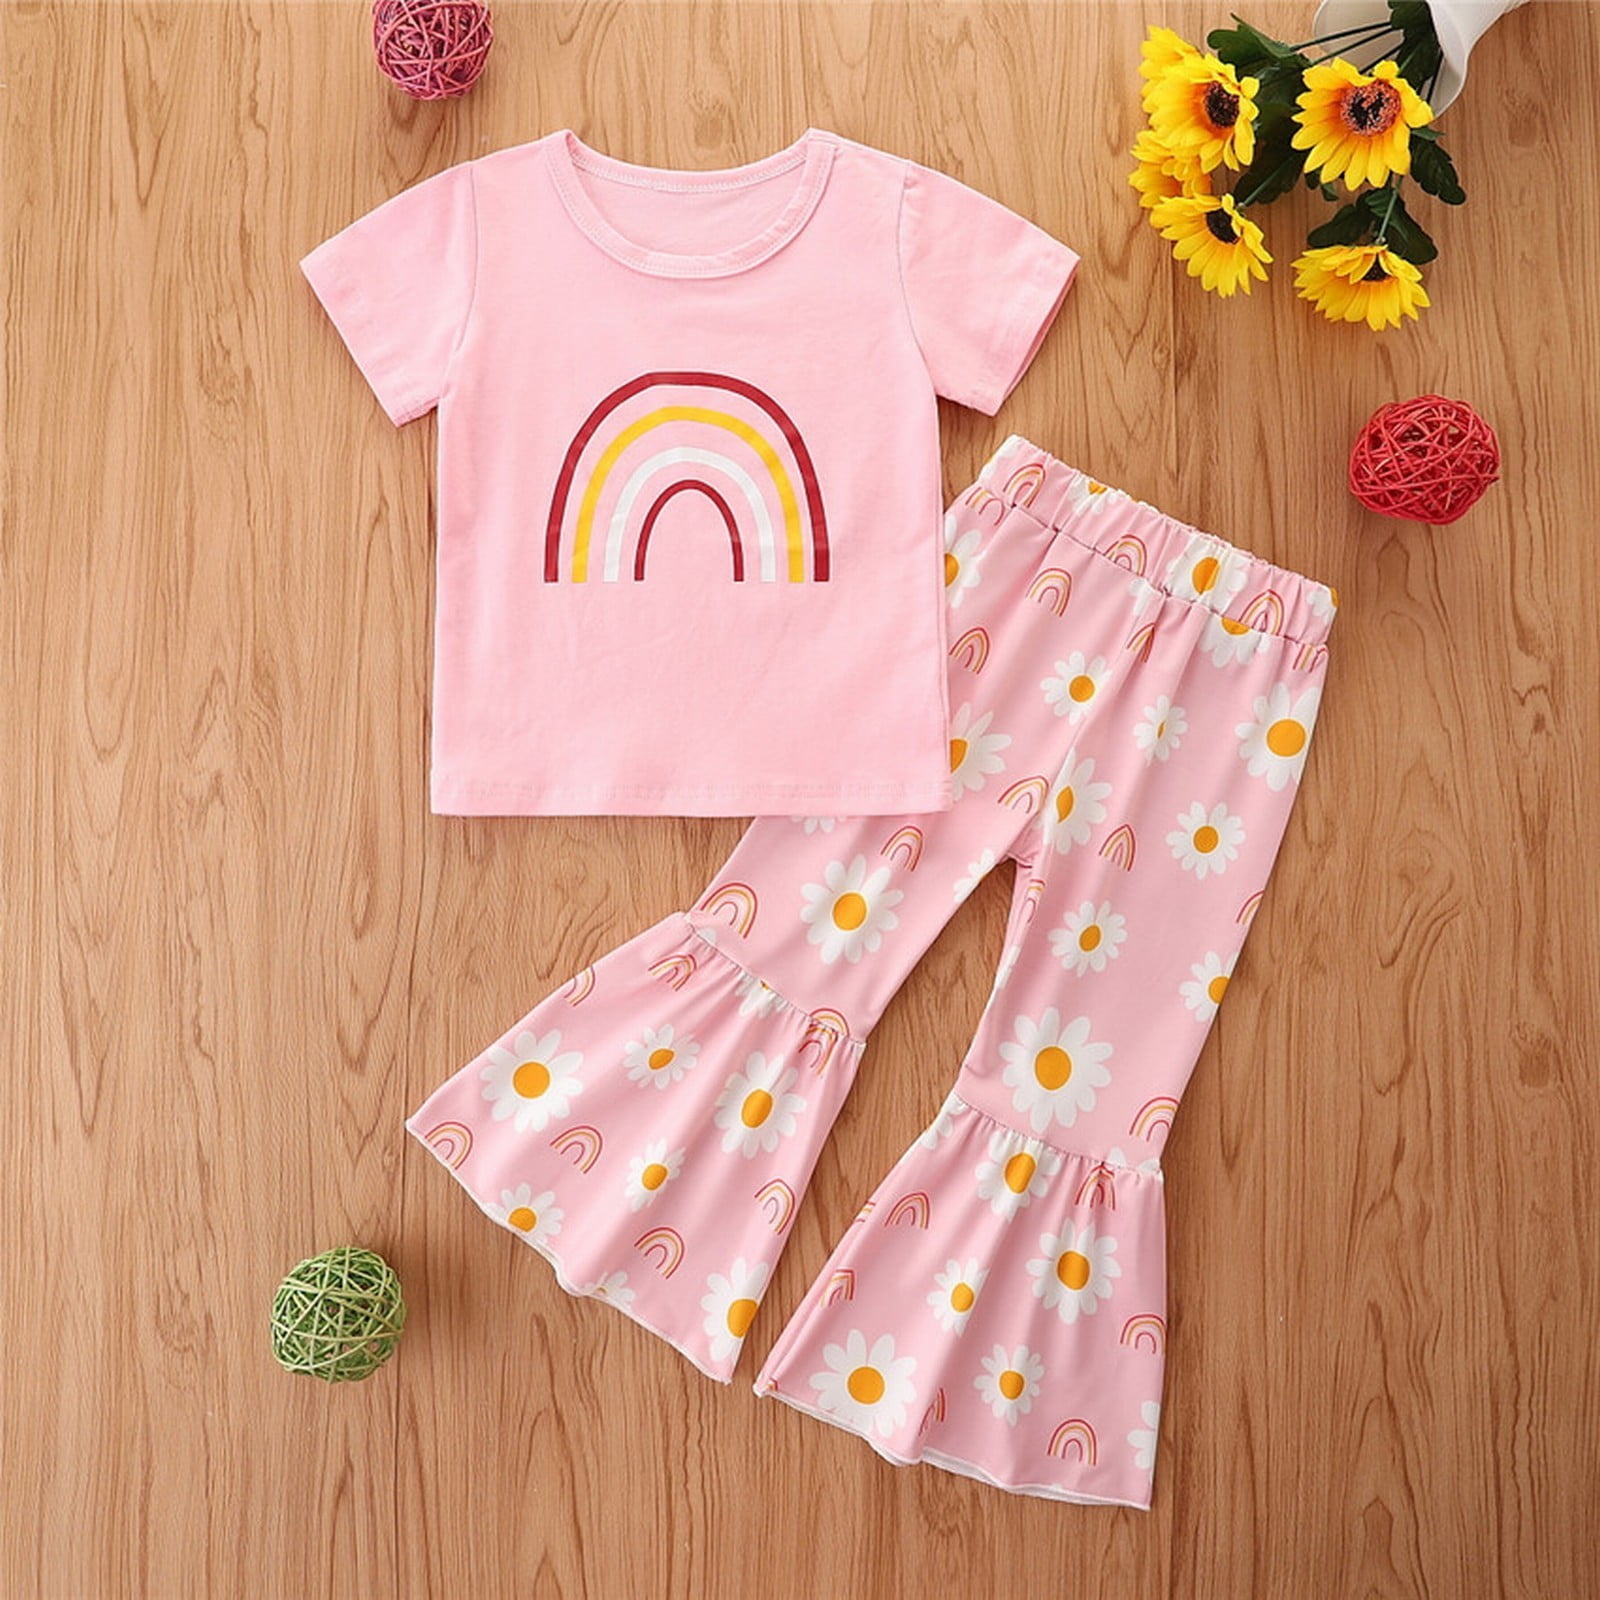 2pcs Baby Girl 100% Cotton Short-sleeve Rainbow Print Knot Front T-shirt and Leopard Flared Pants Set